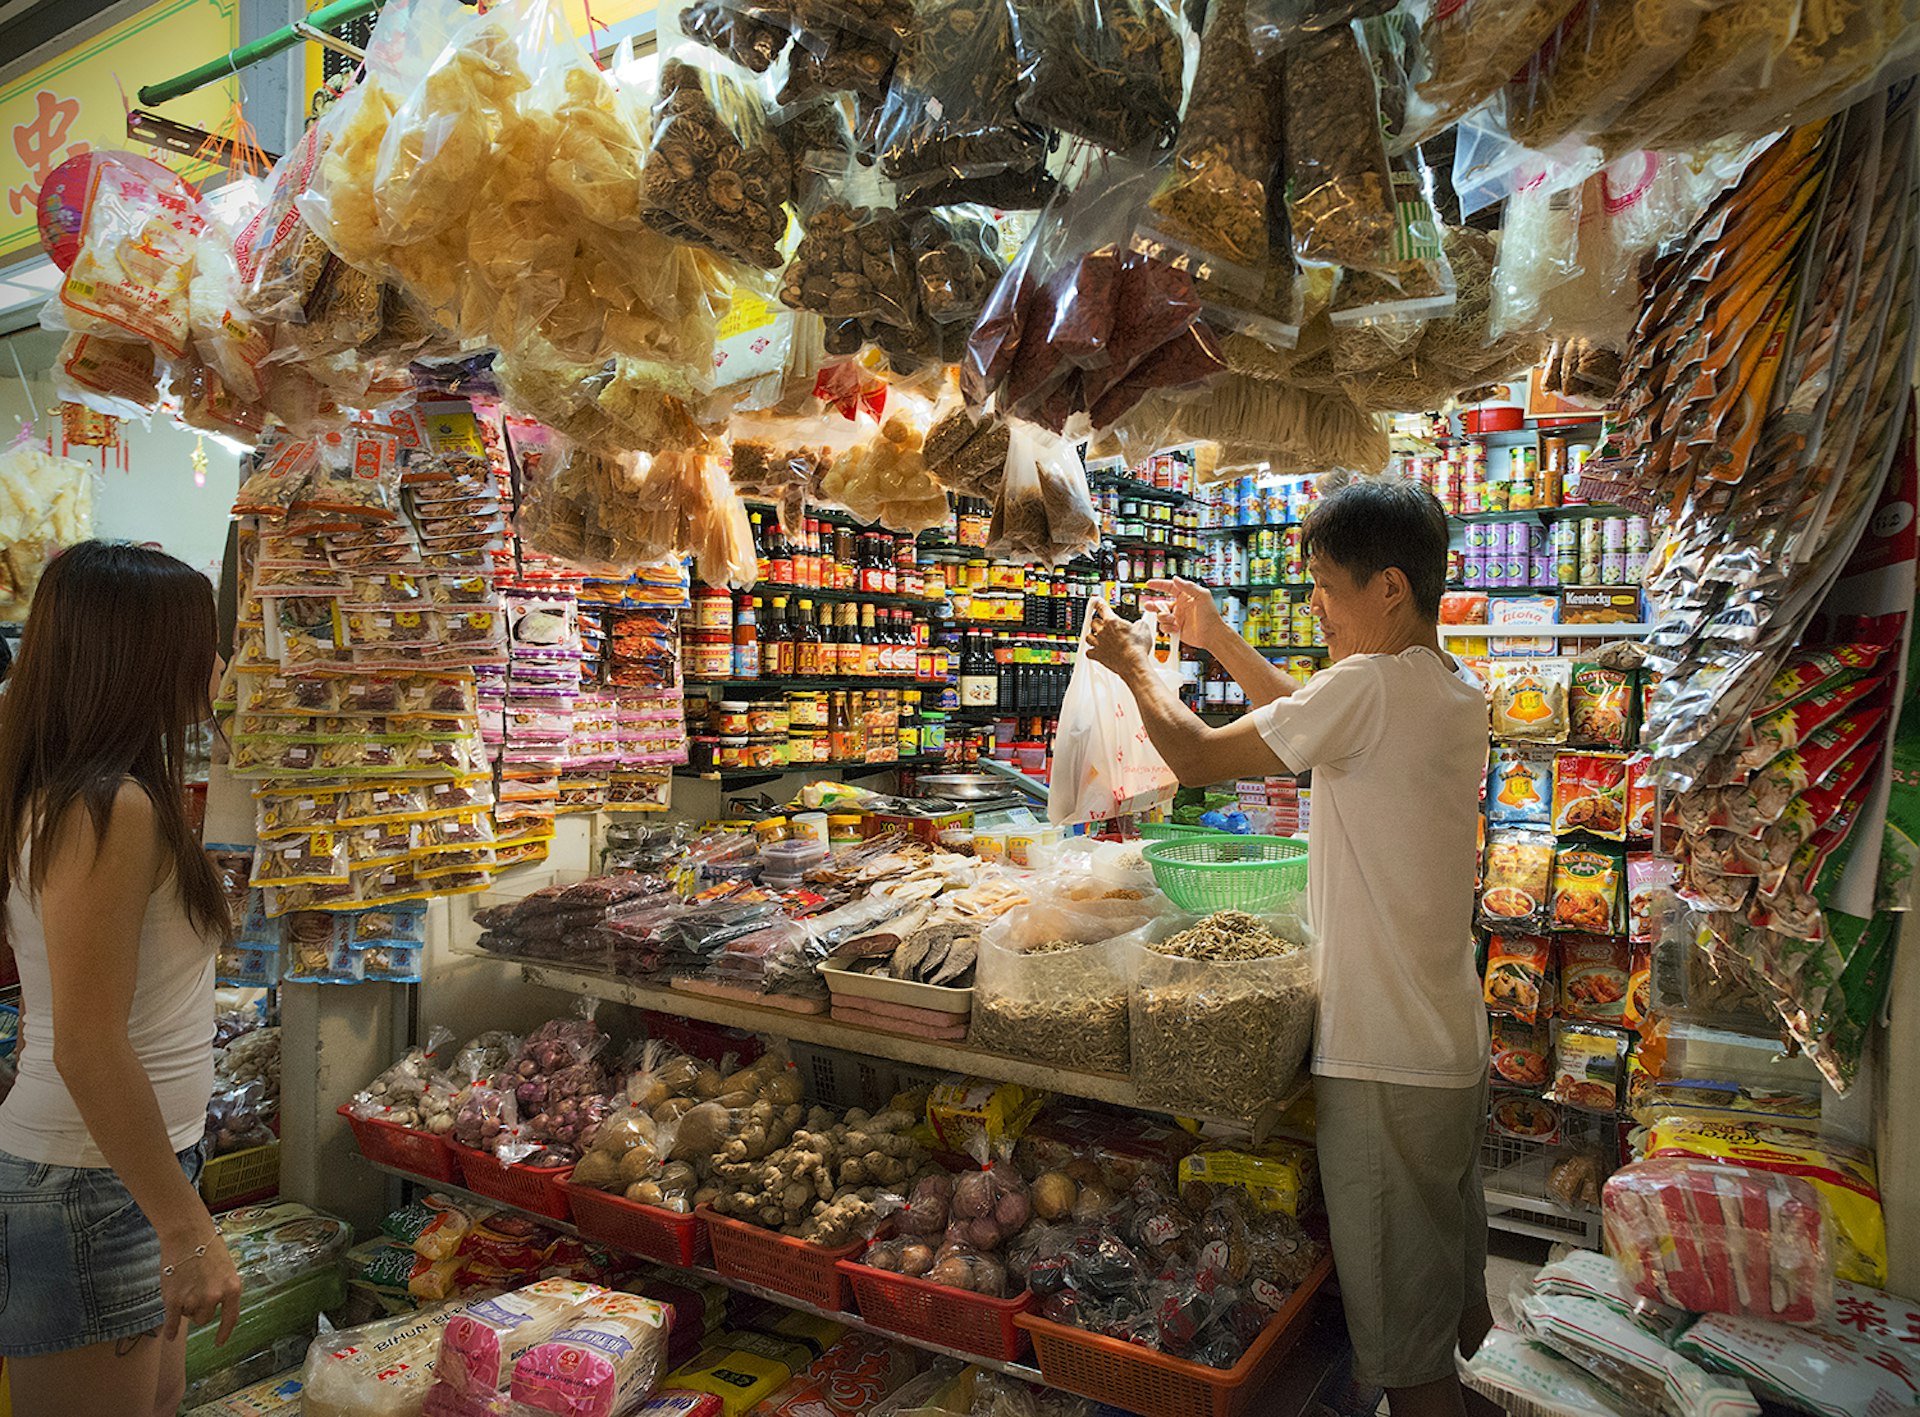 Mountains of spices, dried fish and condiments on sale in a traditional Tiong Bahru grocer's shop. Image by Andrew Too Boon Tan / Monument Mobile / Getty Images